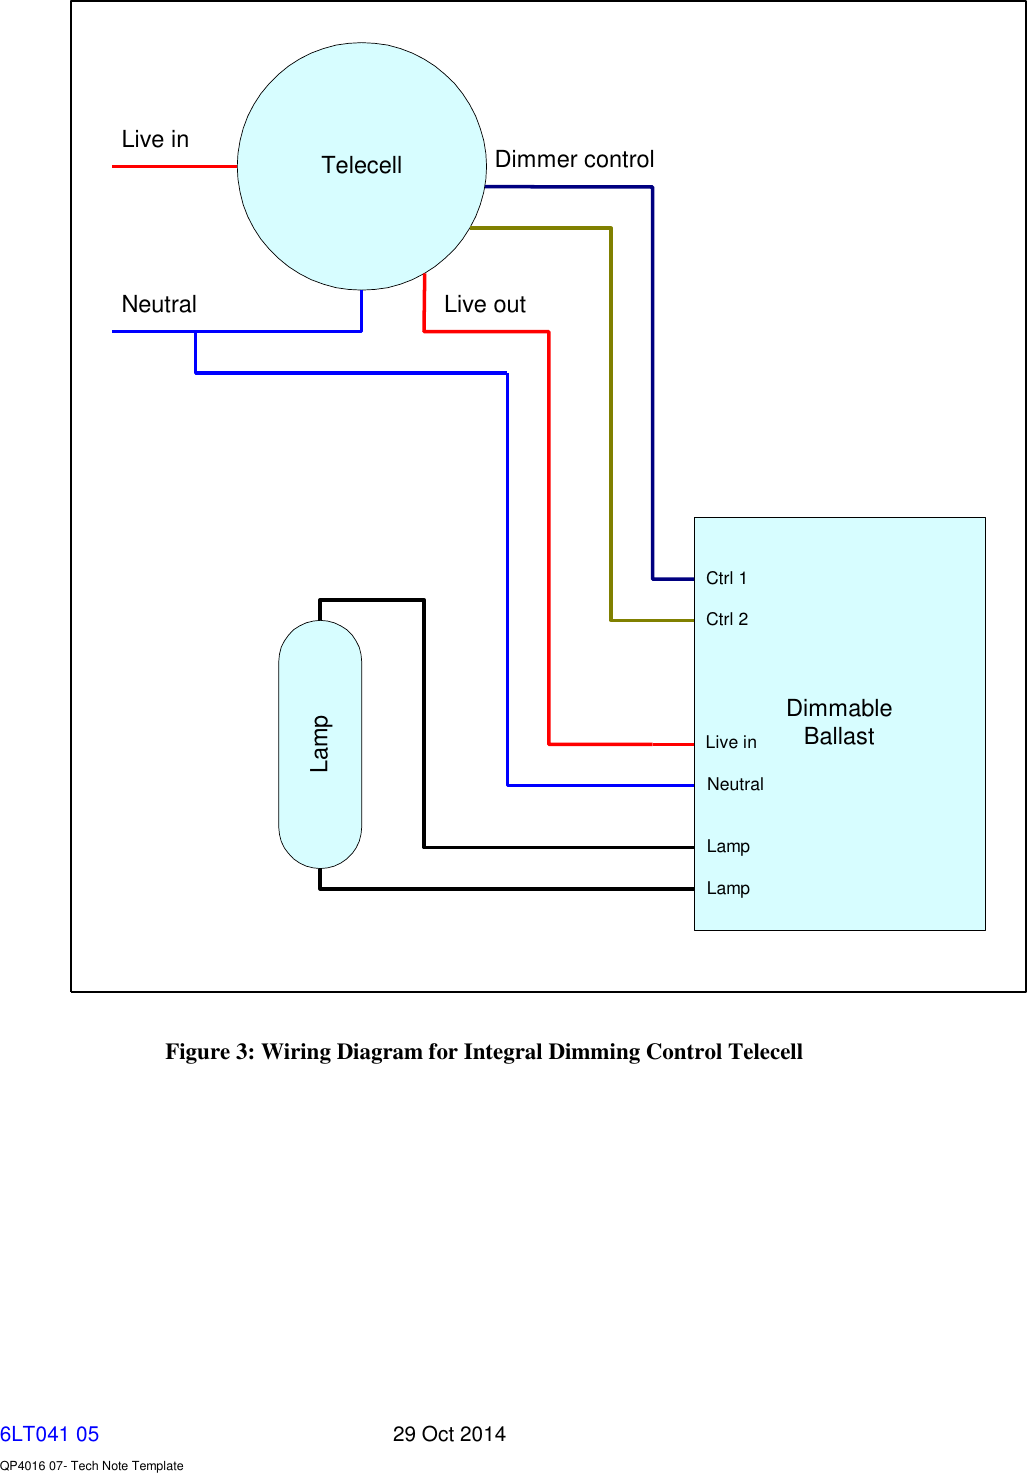   6LT041 05       29 Oct 2014    QP4016 07- Tech Note Template TelecellDimmableBallastLampLive inNeutral Live outDimmer controlLampLampNeutralLive inCtrl 1Ctrl 2 Figure 3: Wiring Diagram for Integral Dimming Control Telecell        